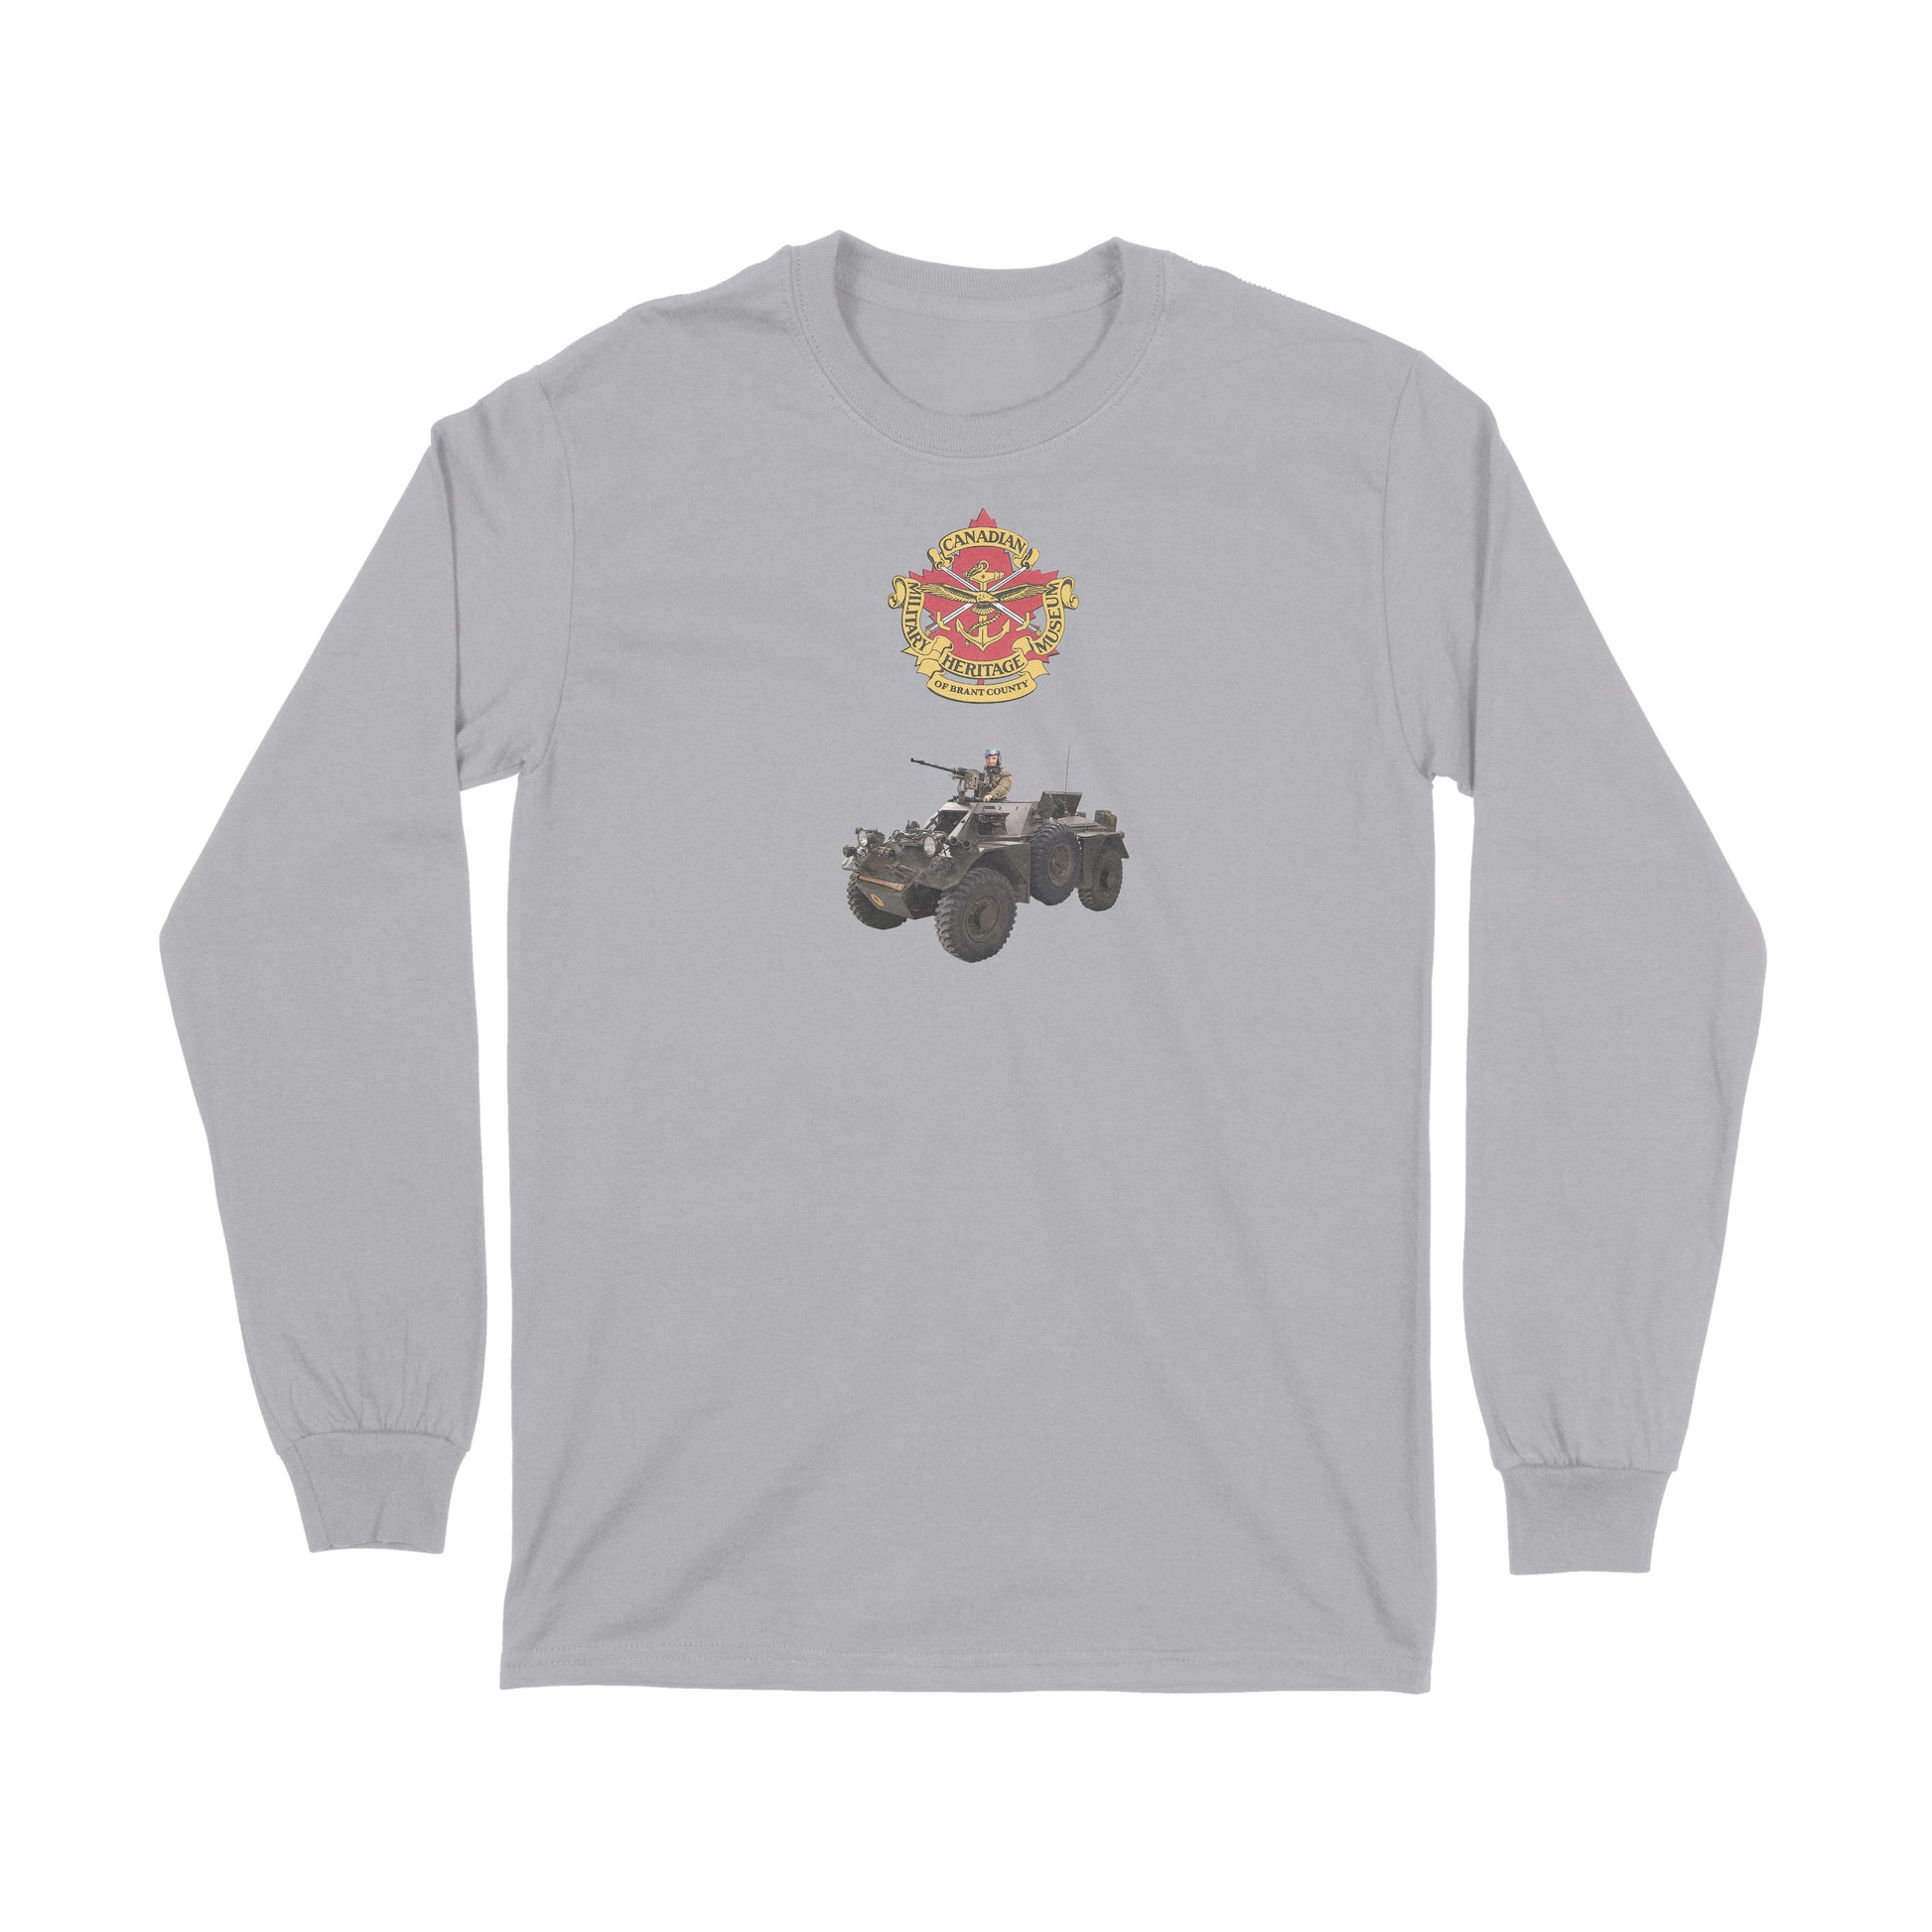 Brantford, Canadian Military Heritage Museum, Fat Dave, Ferret, Long Sleeve, Museum, Grey